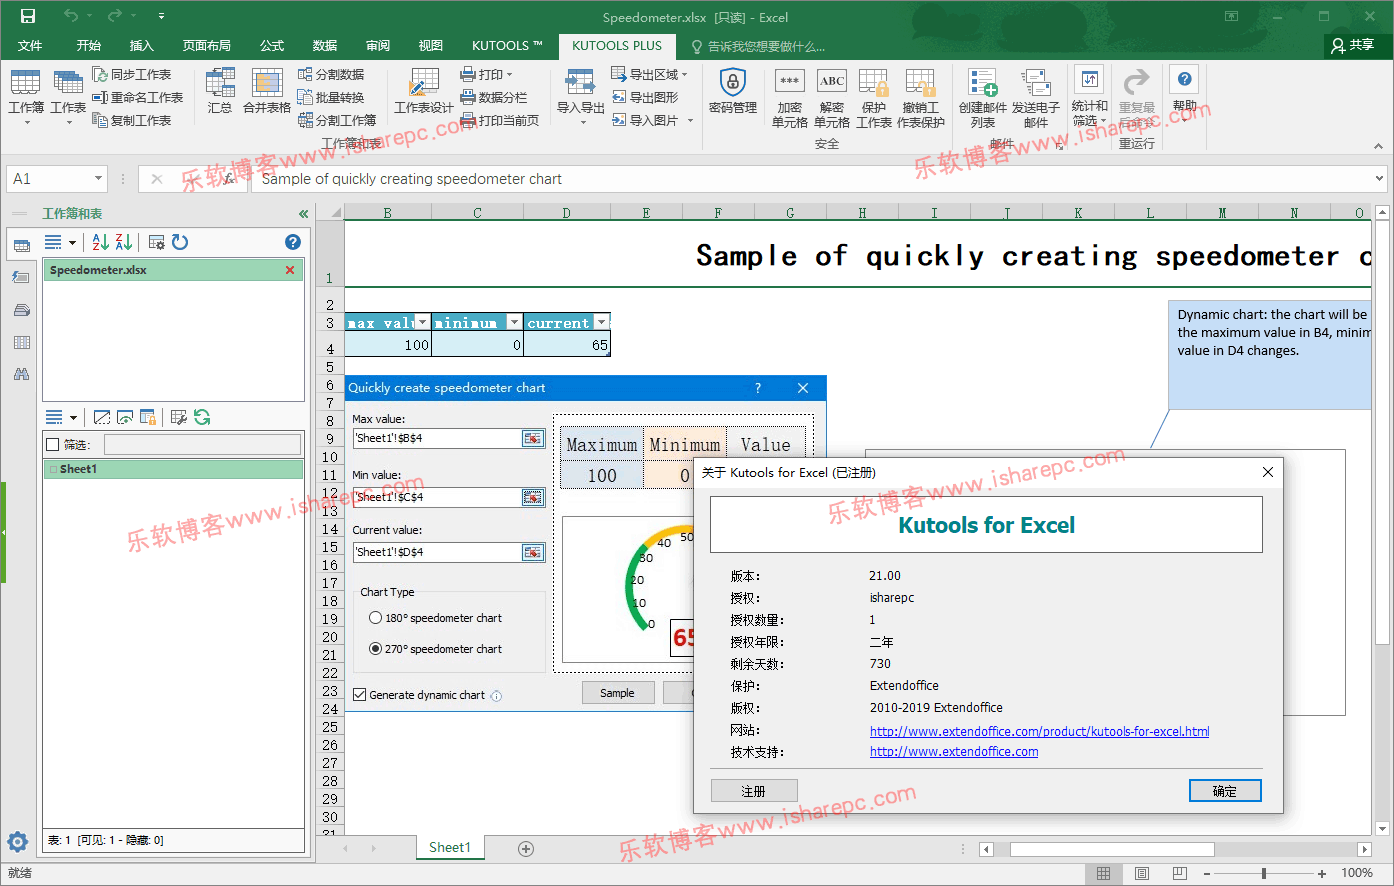 Kutools for Excel v21.0